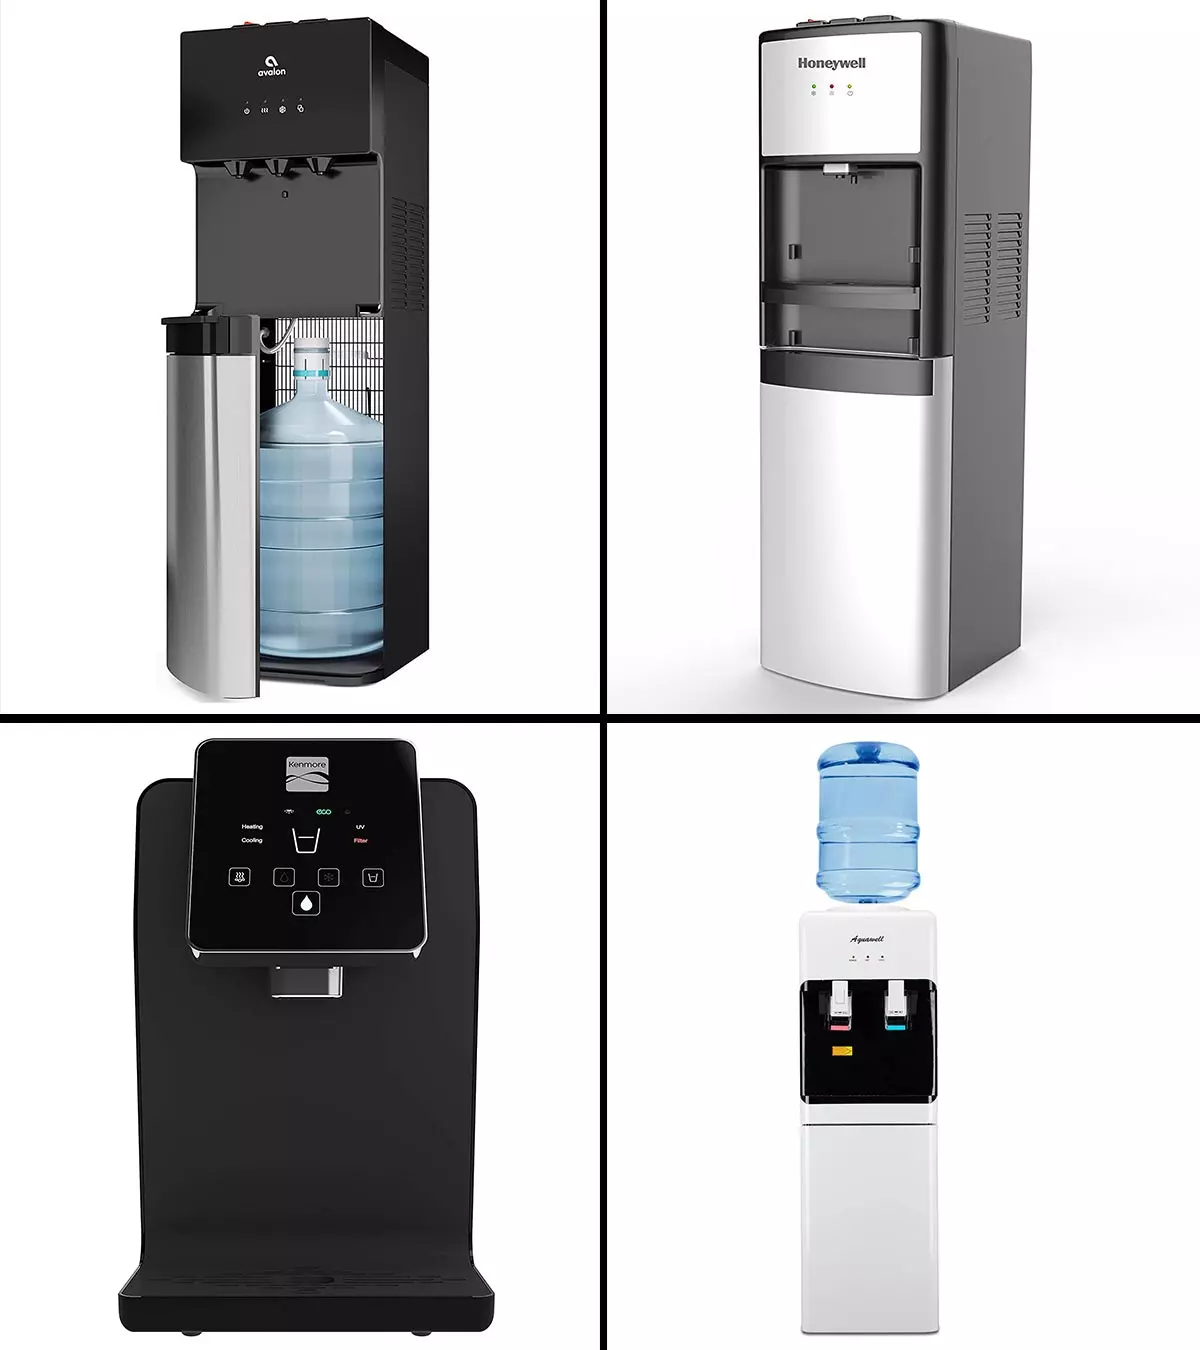 13 Best Water Coolers To Buy In 2020